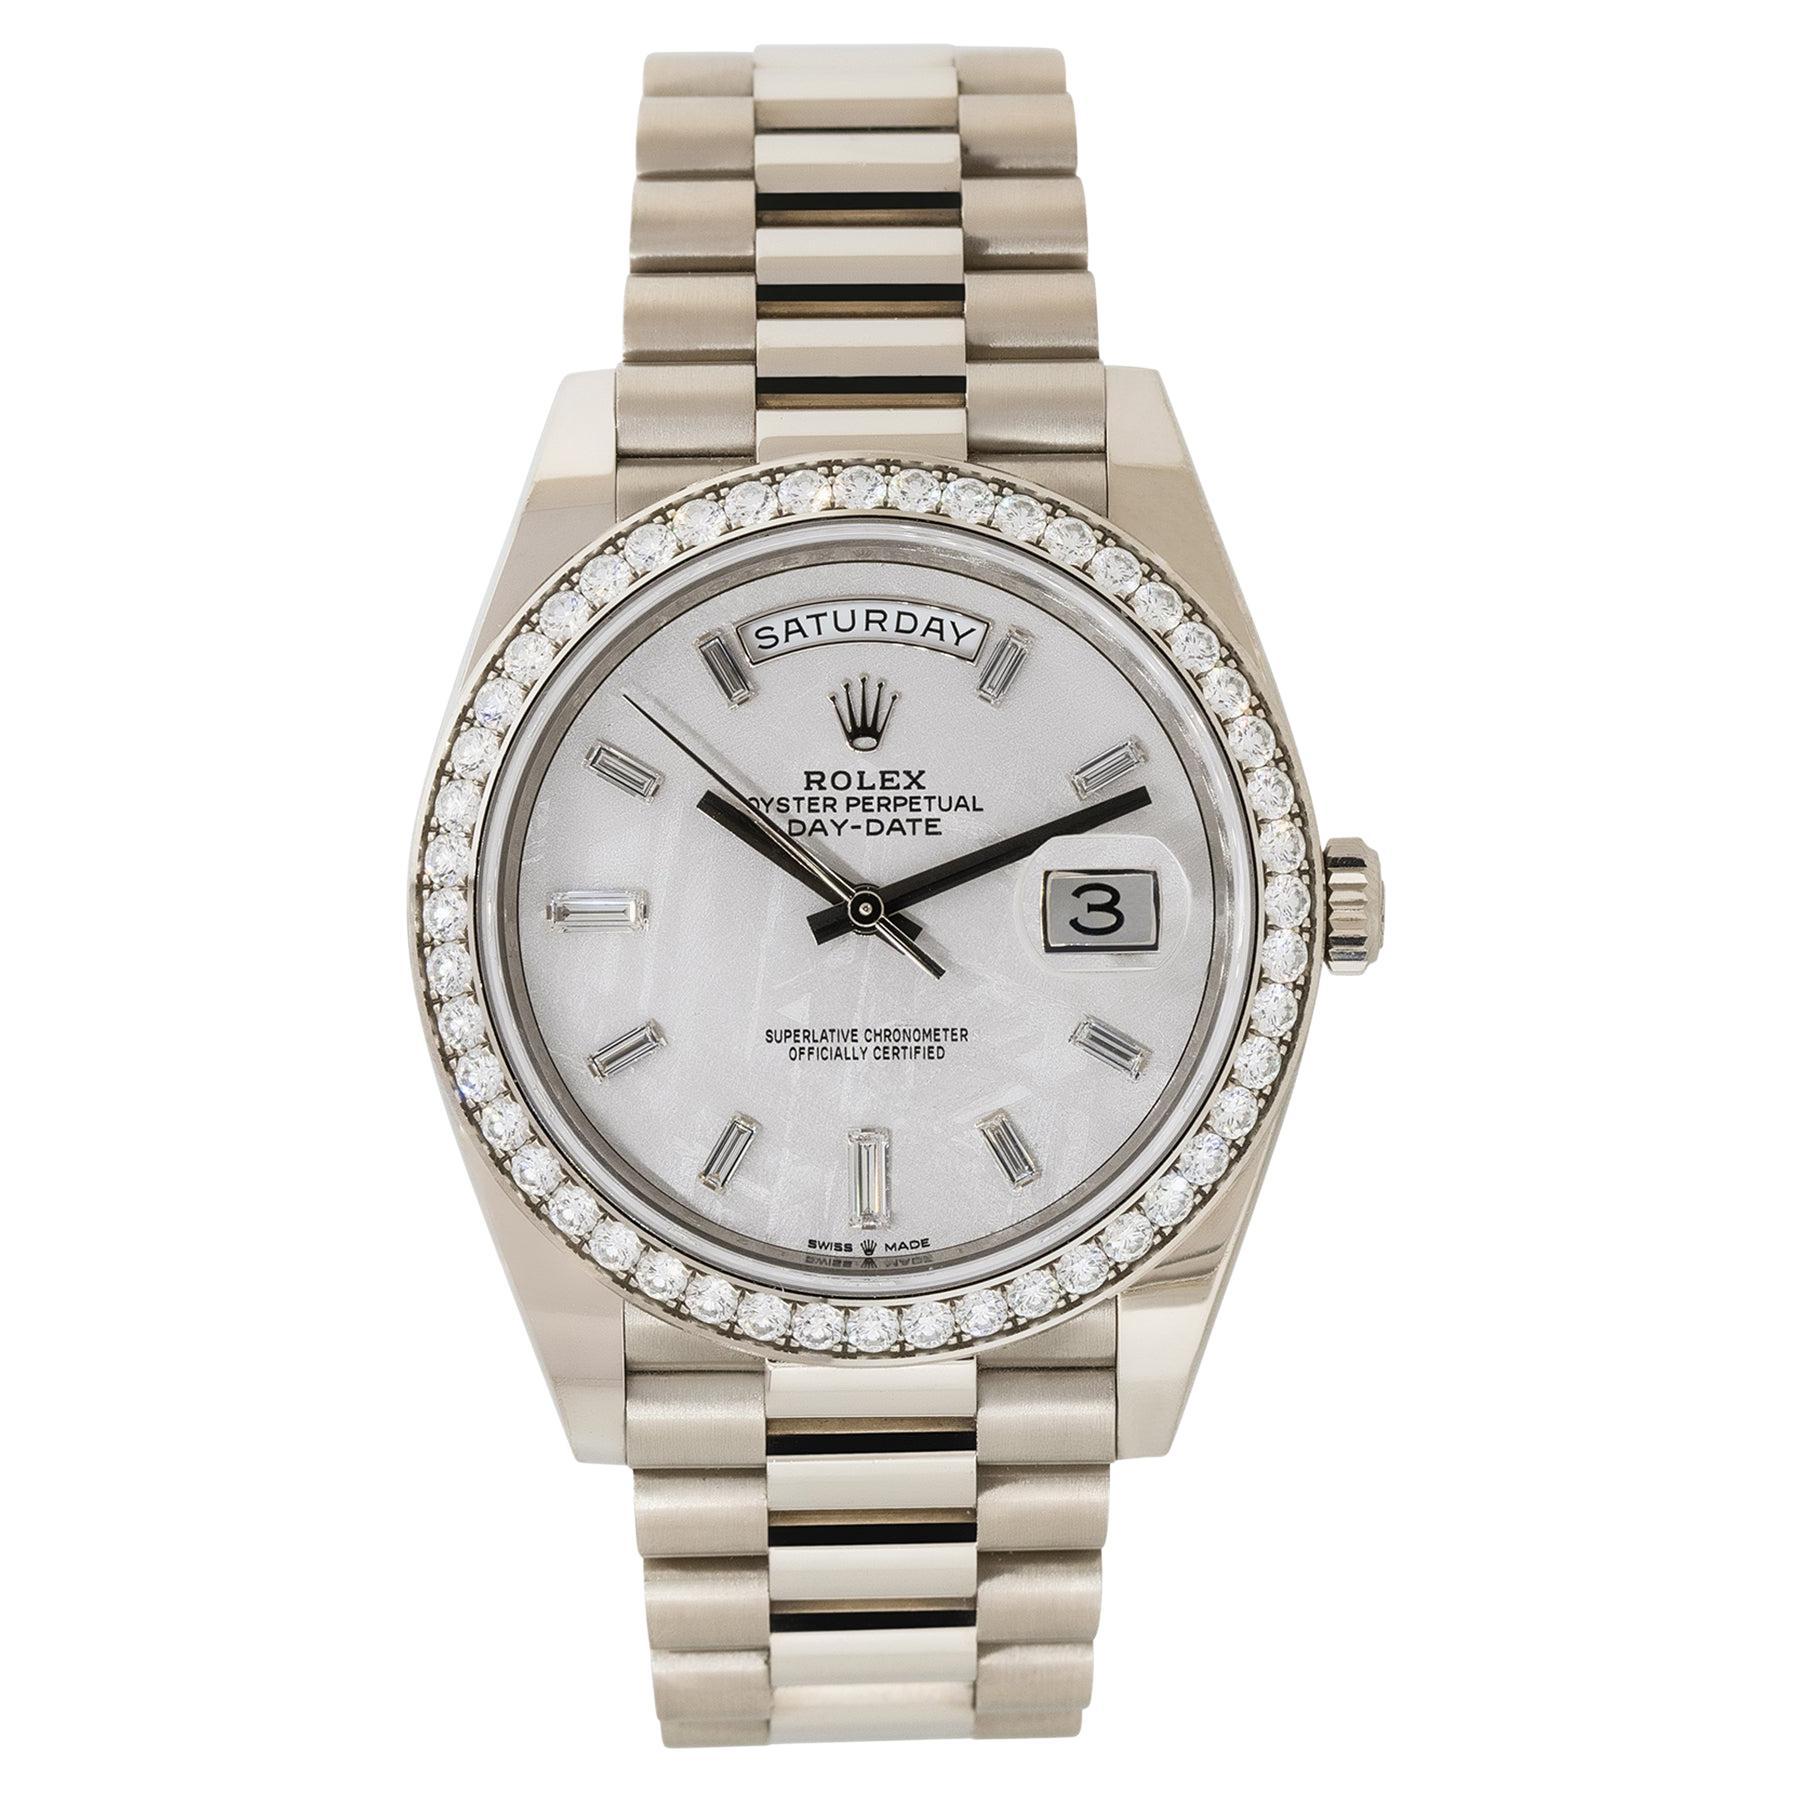 Rolex 228349RBR Day-Date 18k White Gold Meteorite Diamond Dial Watch For Sale